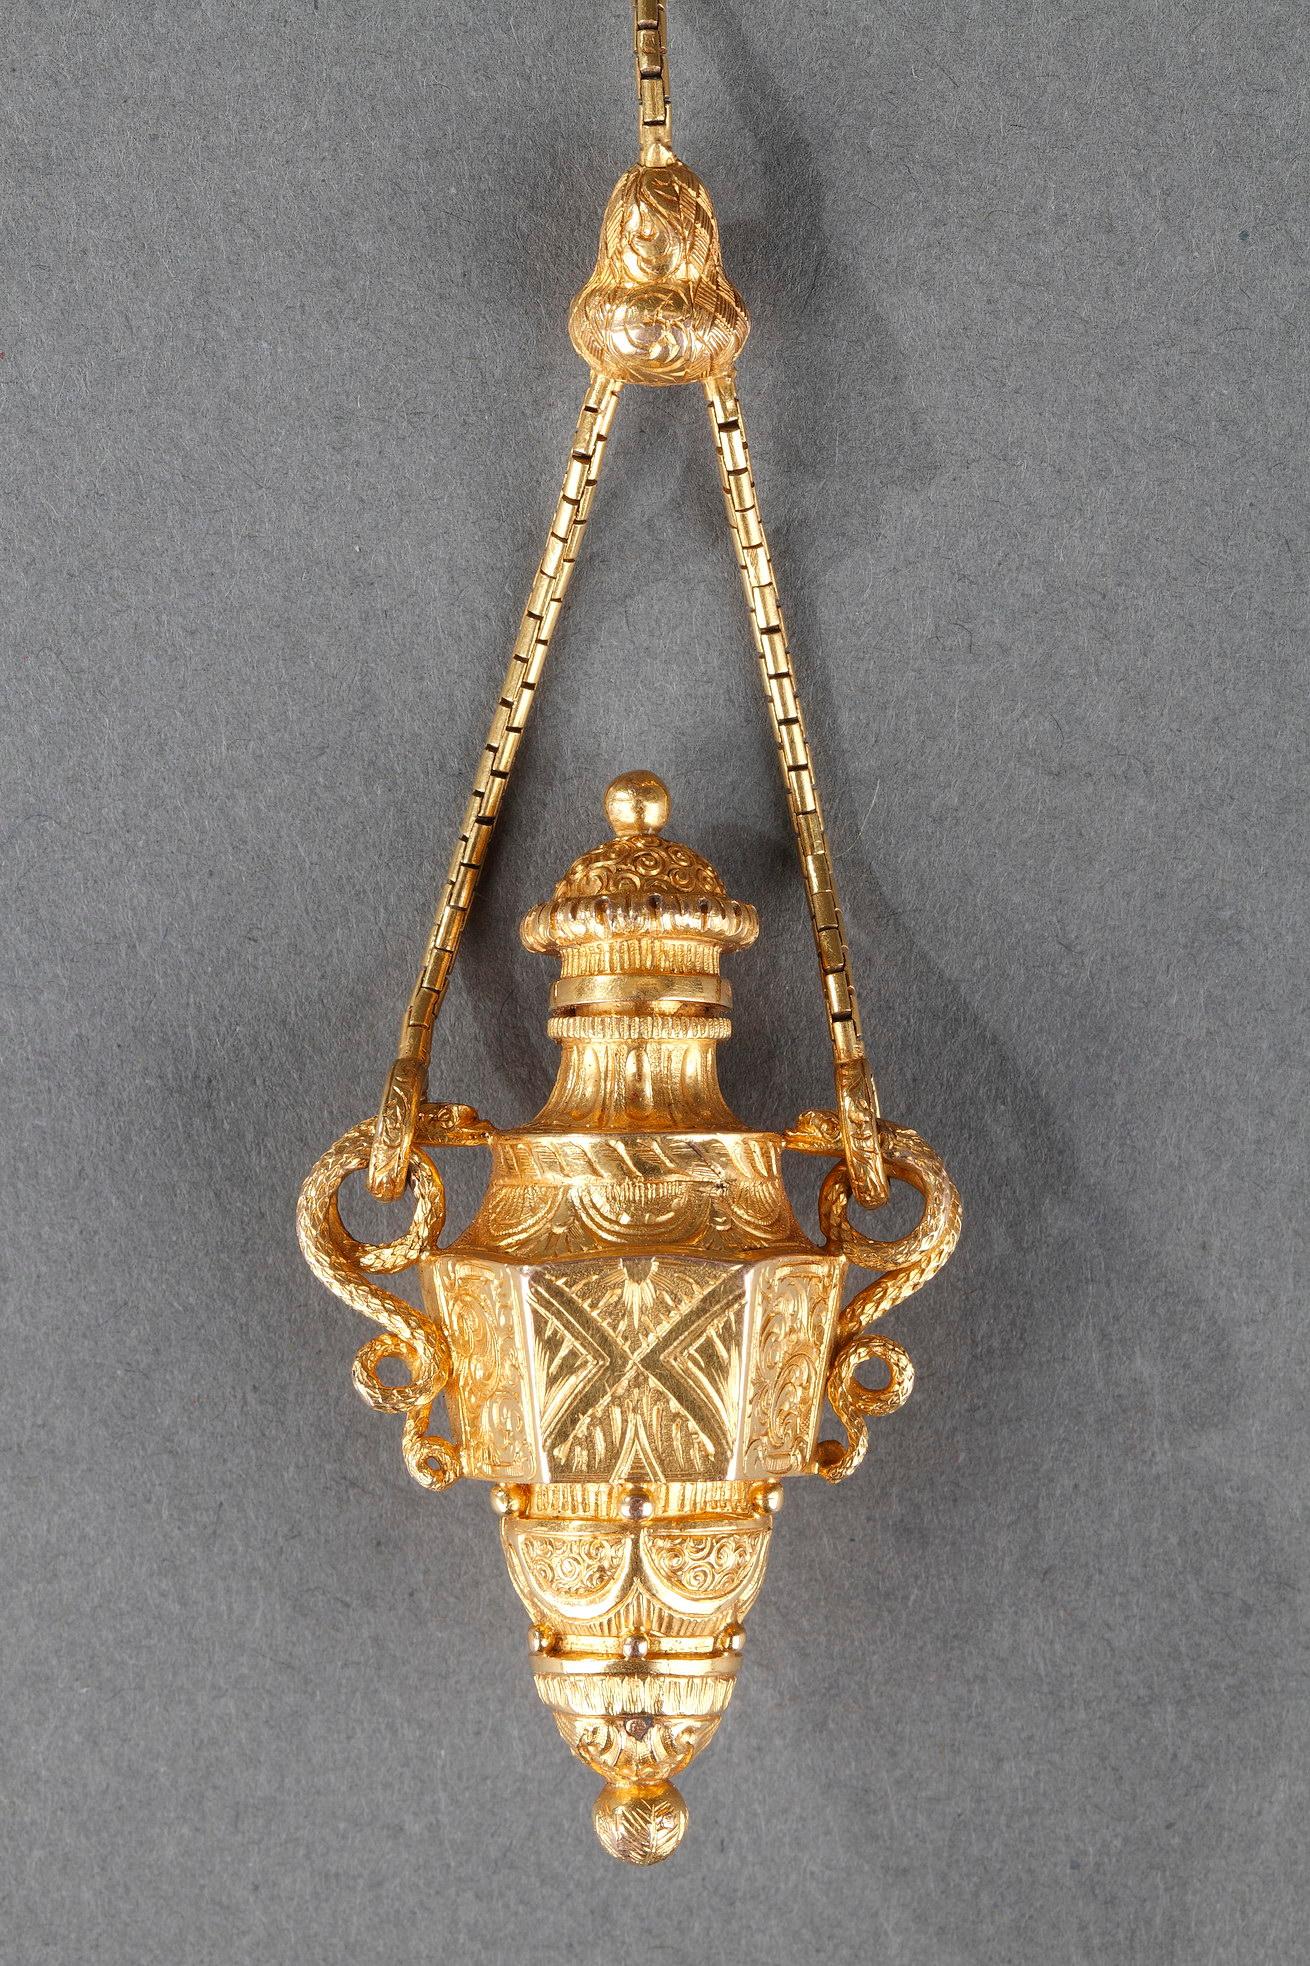 Elegant and attractive perfume flask amphora bottle finely chiseled with foliage. The hinged cover is worked with winding patterns. The amphora is decorated with two snakes handles. The perfume bottle is suspended on an articulated chain connected